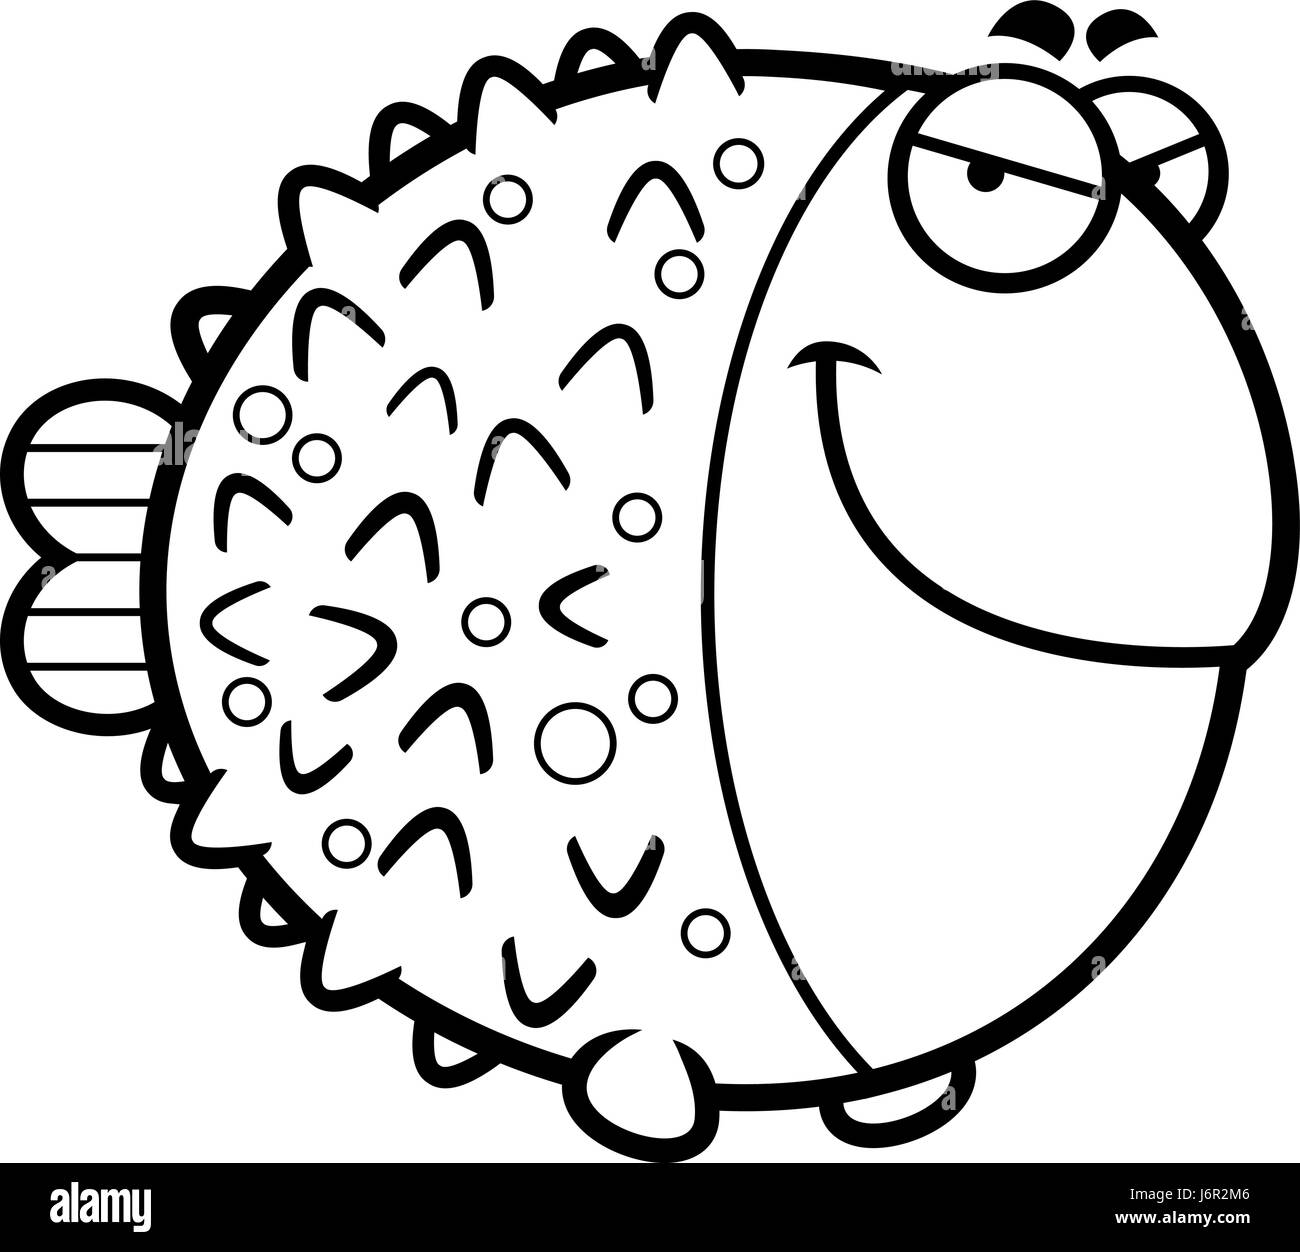 A cartoon illustration of a pufferfish with a sly expression. Stock Vector